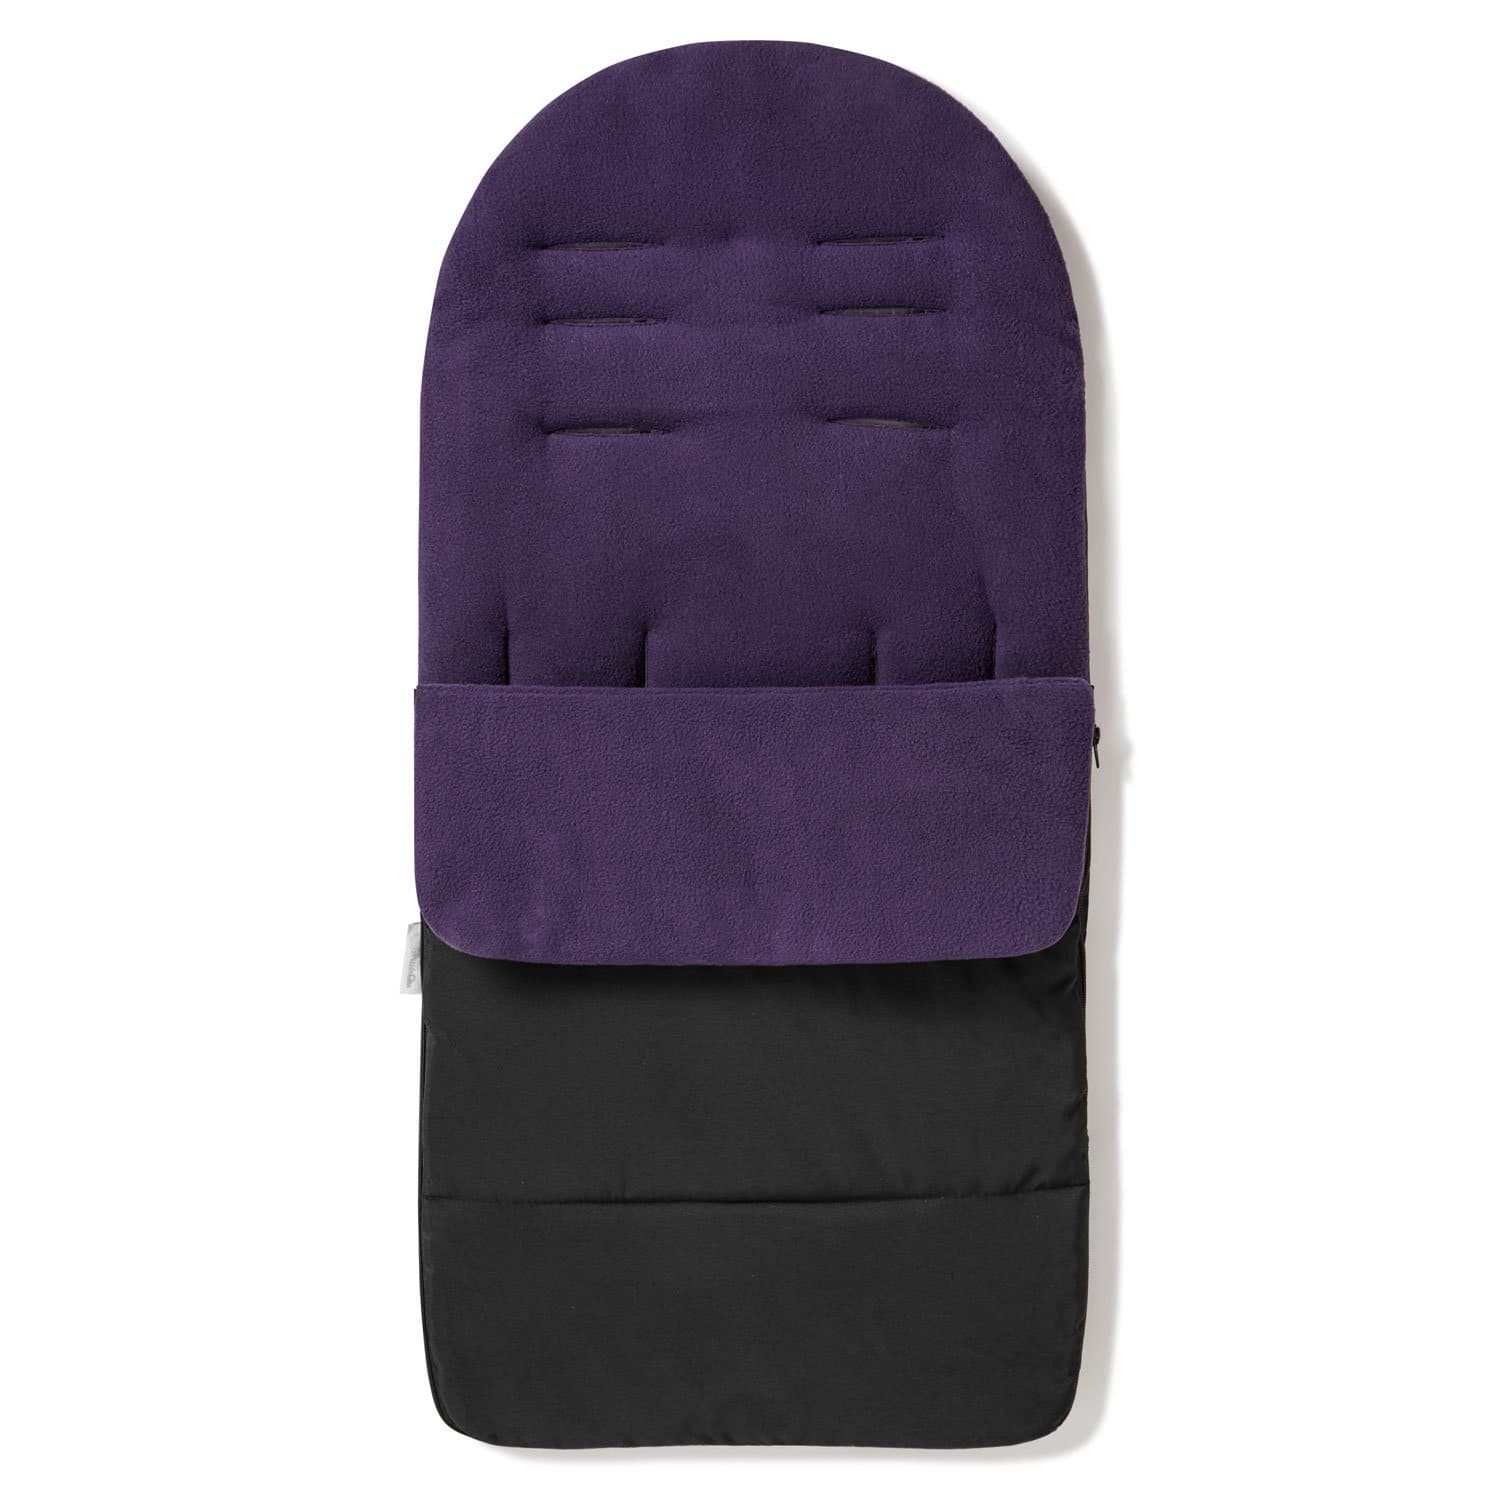 Premium Footmuff / Cosy Toes Compatible with Mamas & Papas - Plum Purple / Fits All Models | For Your Little One